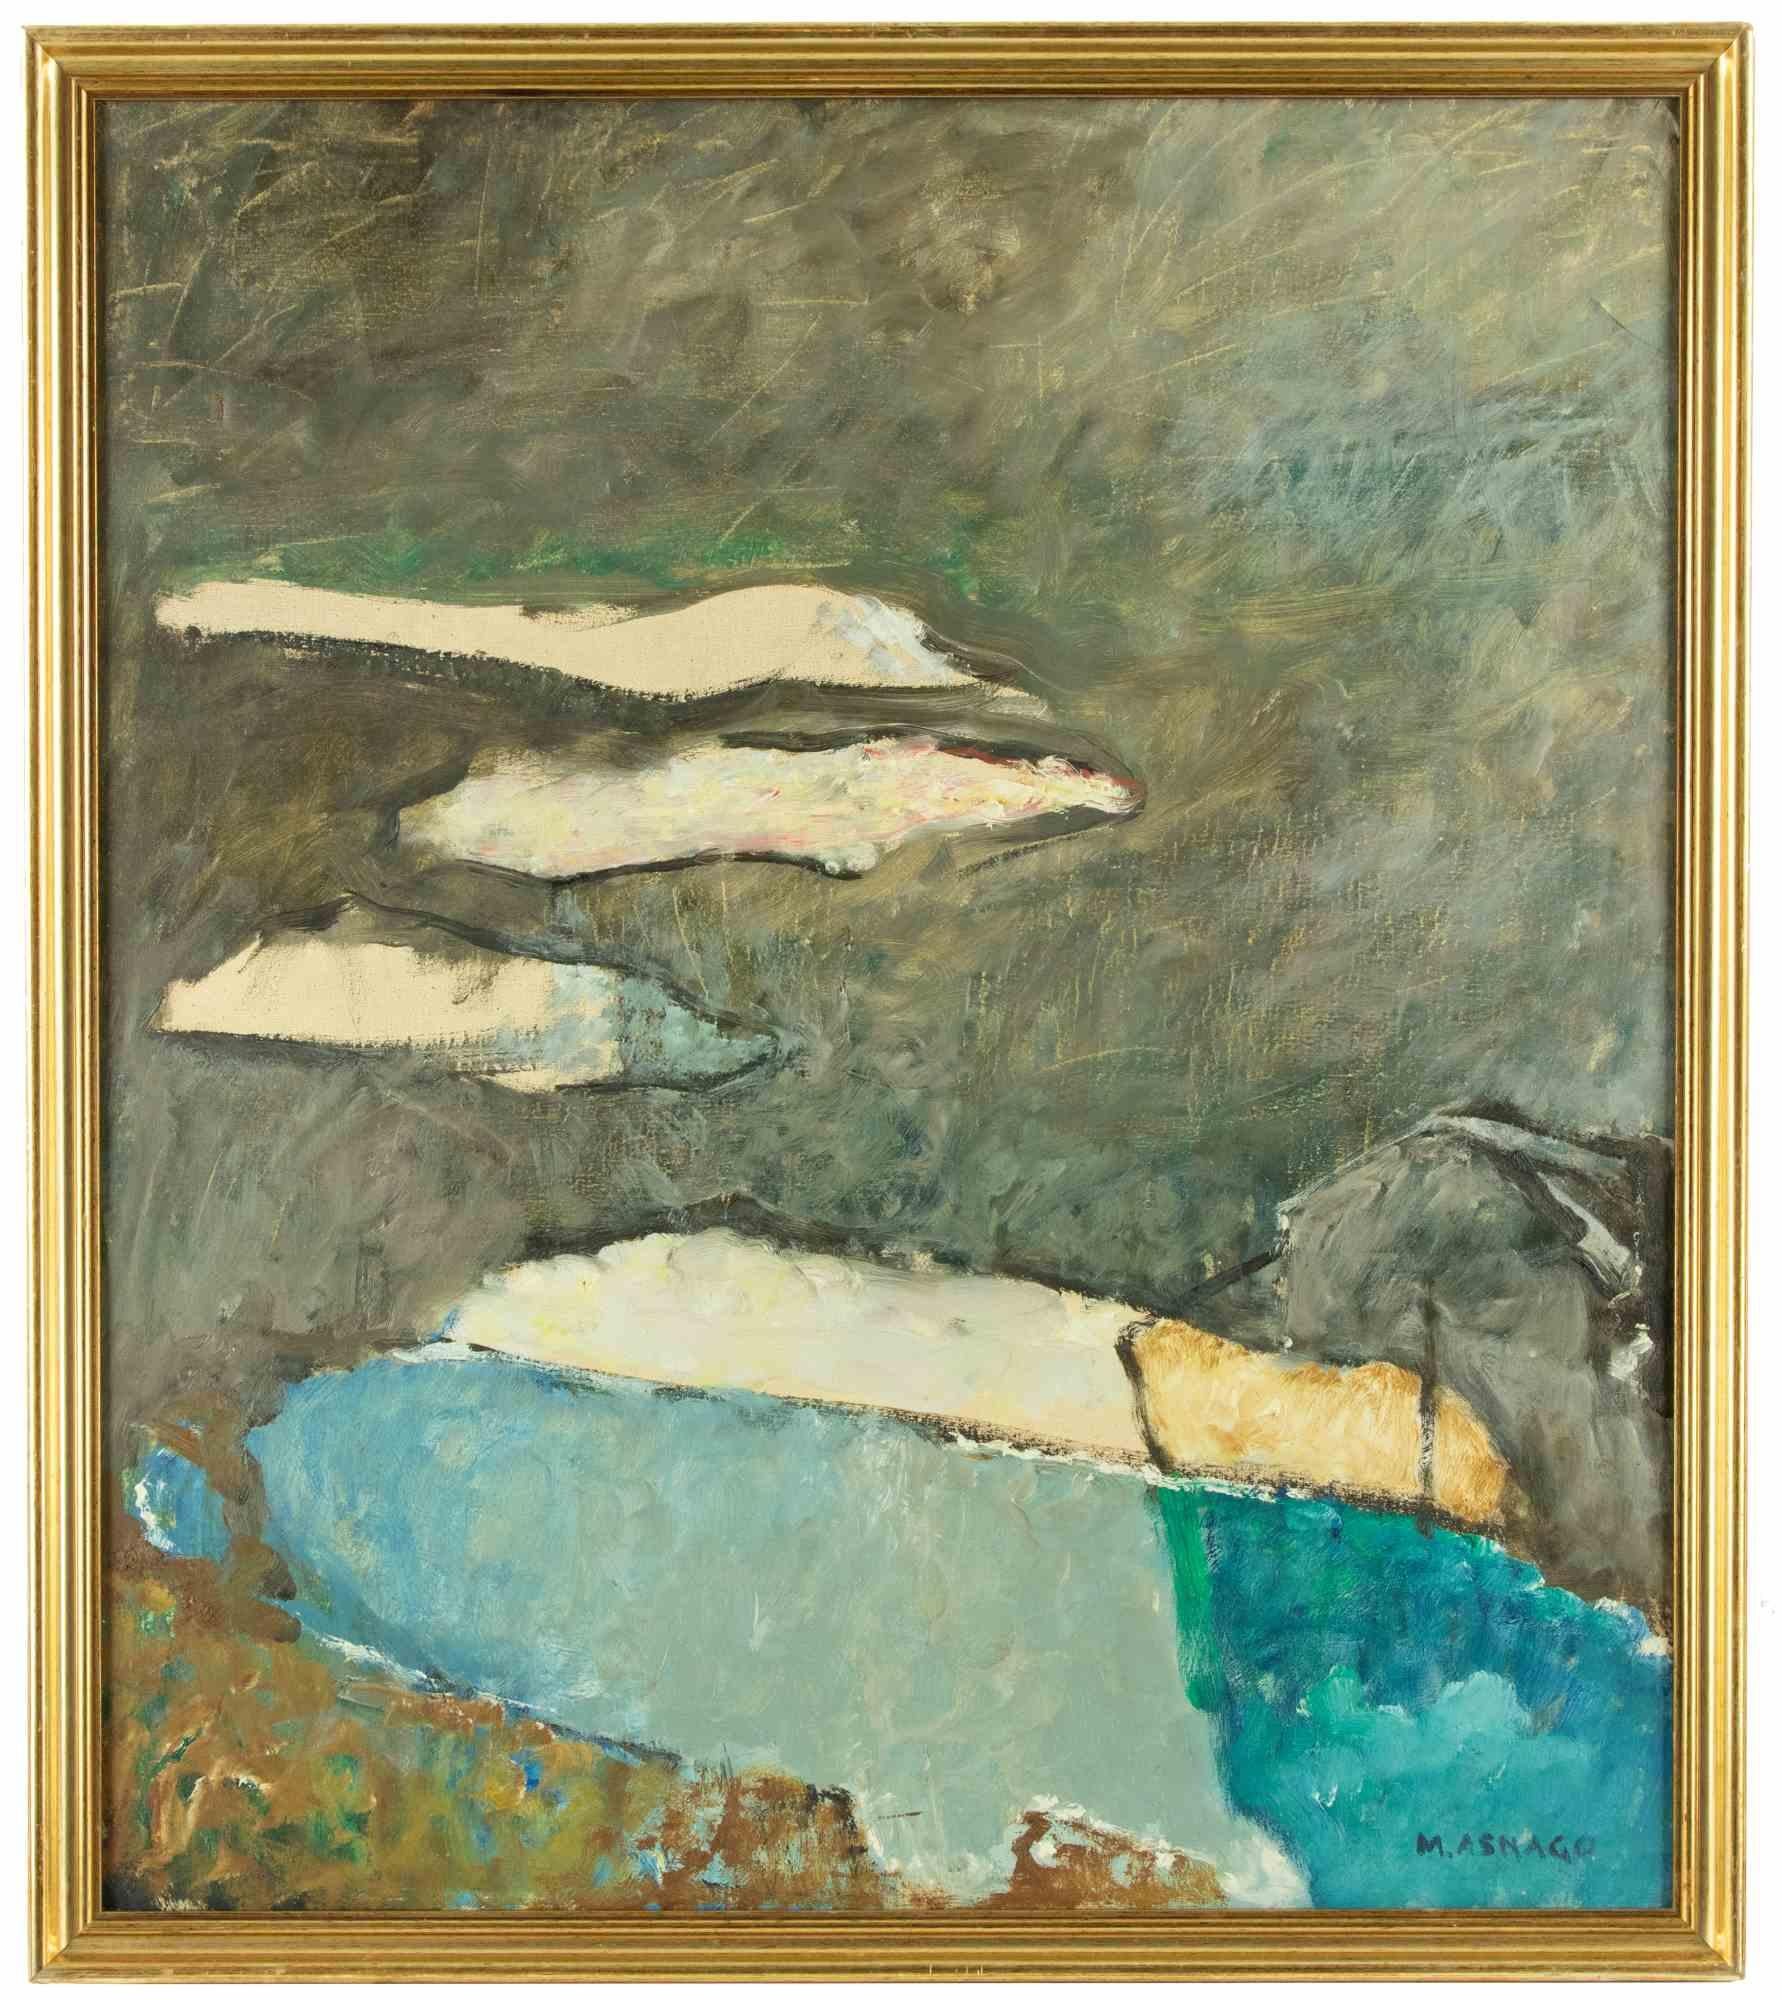 Blue Landscape - Oil on Canvas by Mario Asnago - Mid-20th Century